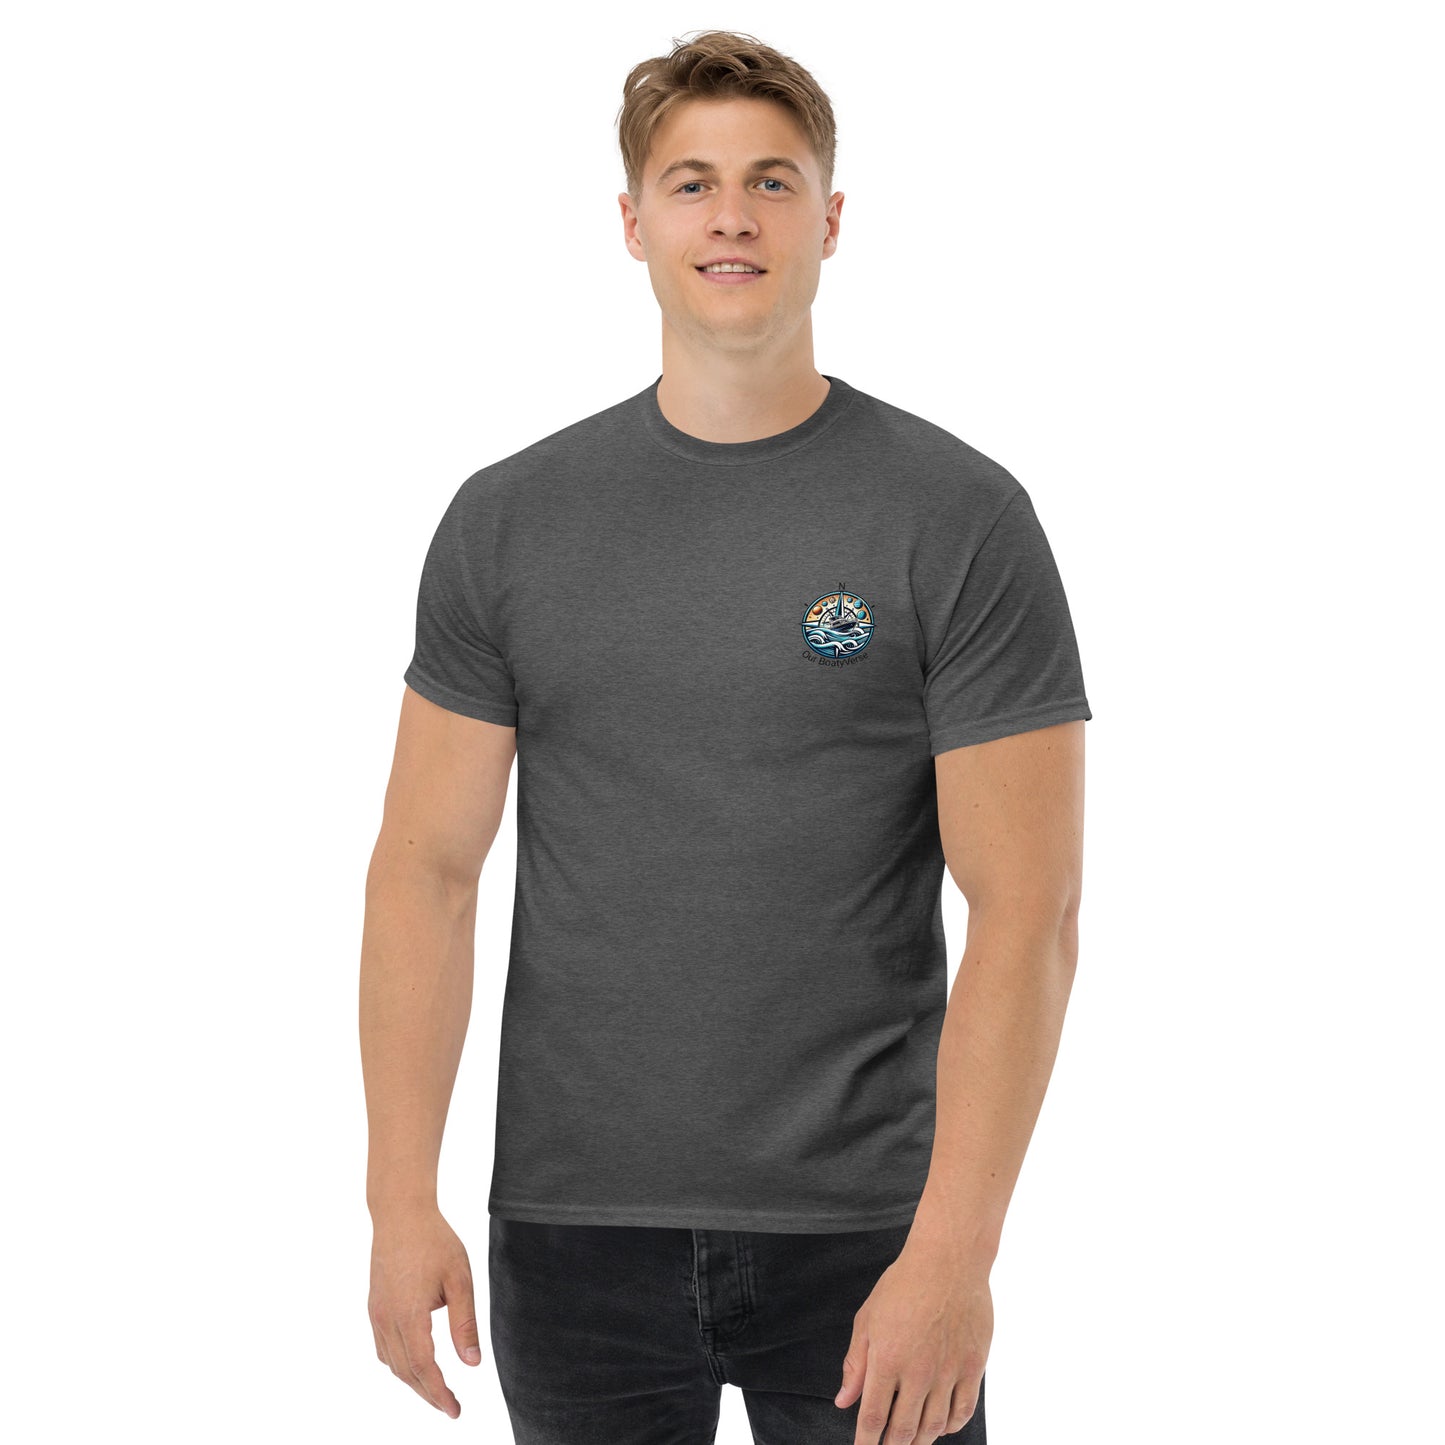 Simplicity, Men's classic T-Shirt by Our BoatyVerse